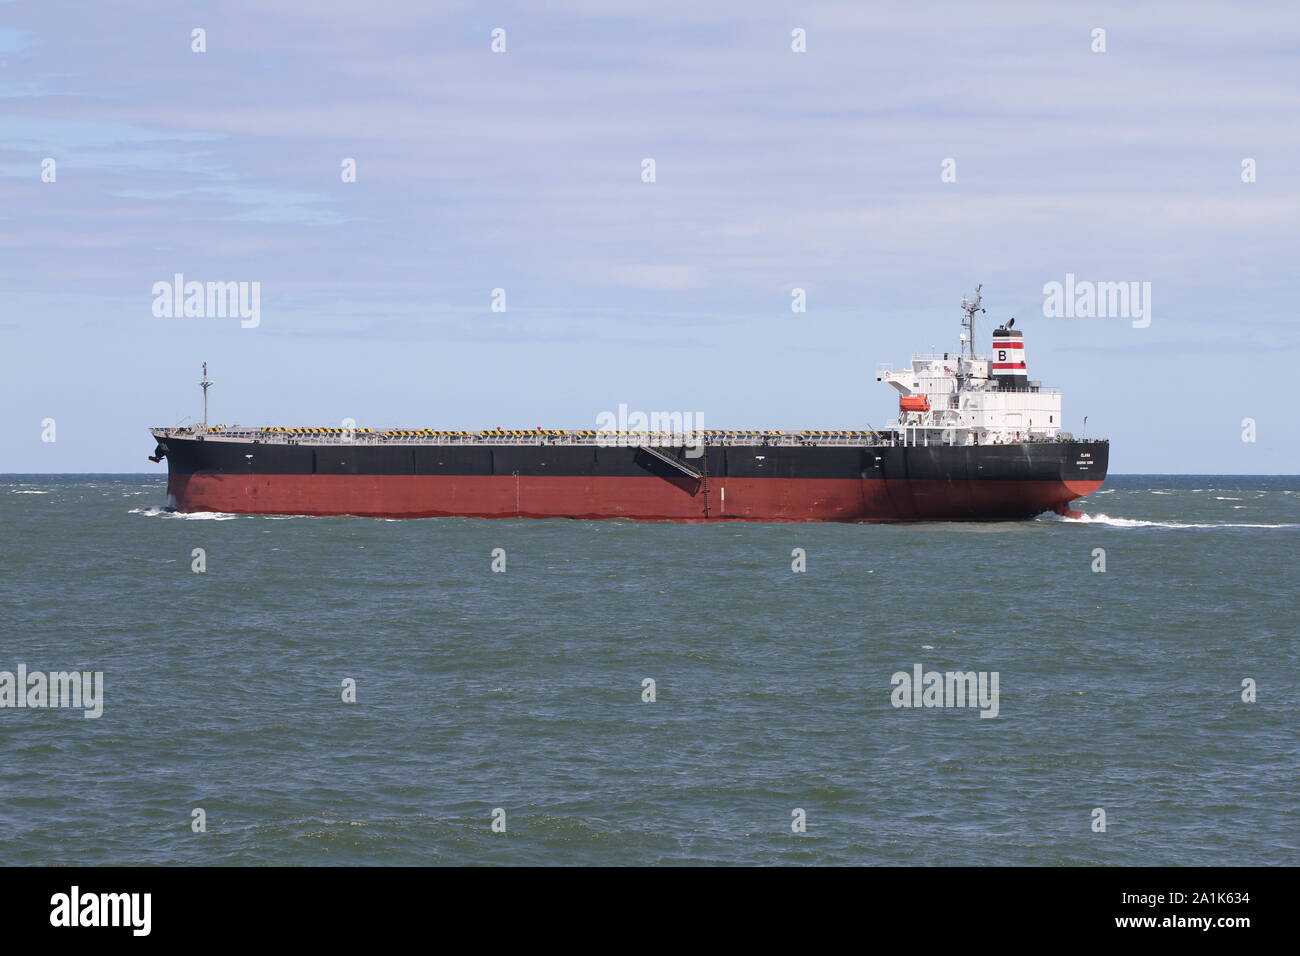 The bulk carrier Clara leaves the port of Rotterdam on 3 July 2019. Stock Photo